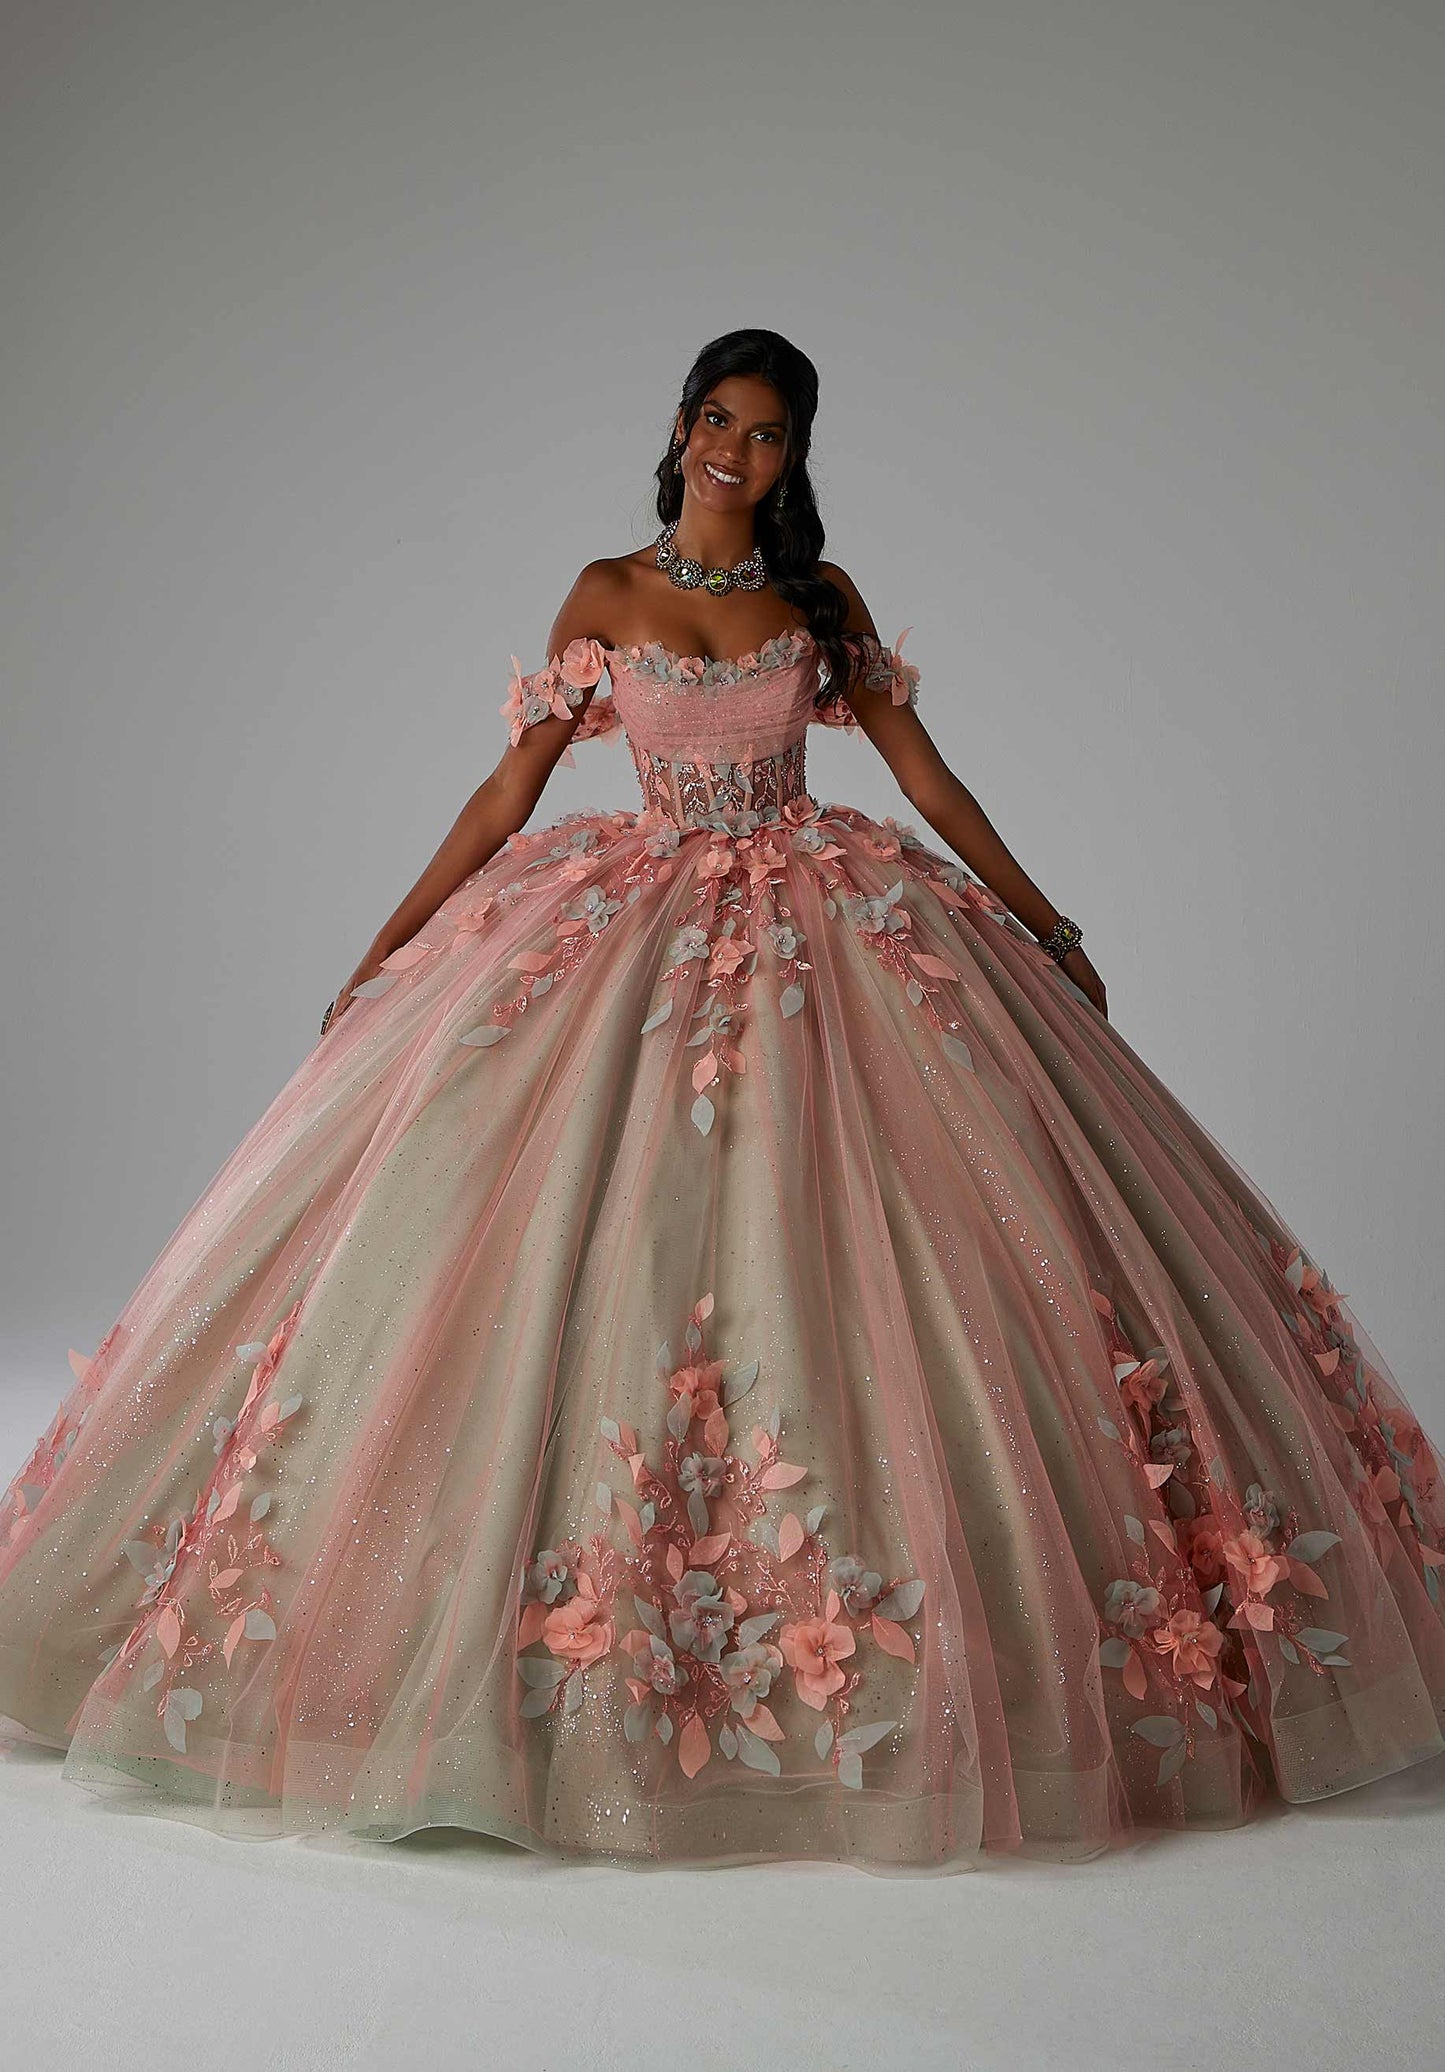 11869 | Three-Dimensional Floral Embroidery with Crystal Beading on a Tulle Over Sparkle Tulle Ball Gown with Sheer Bodice Quinceanera Dress